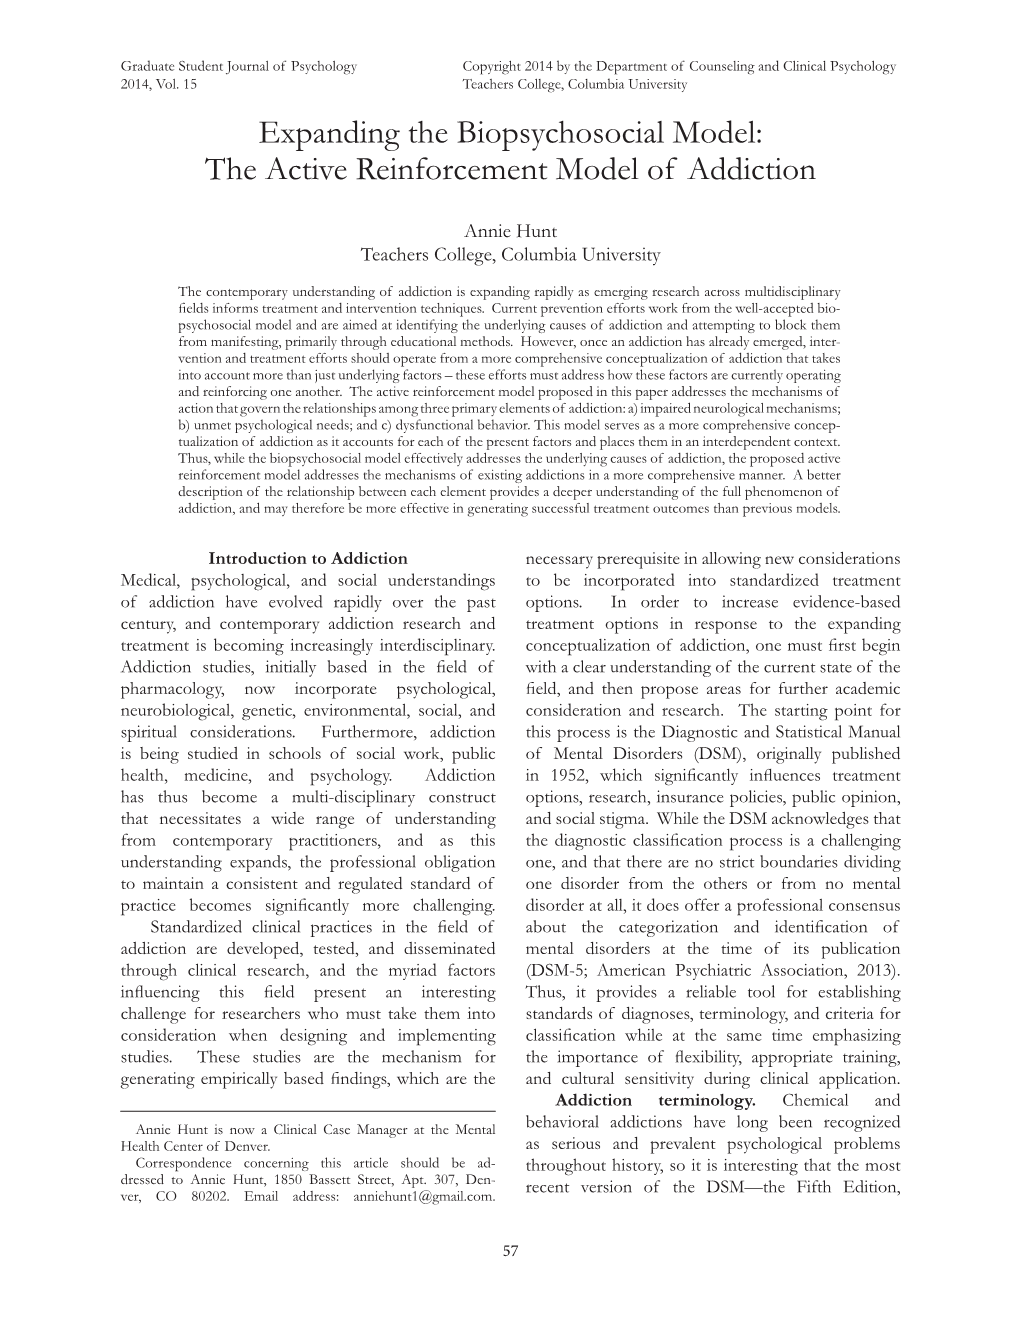 The Active Reinforcement Model of Addiction